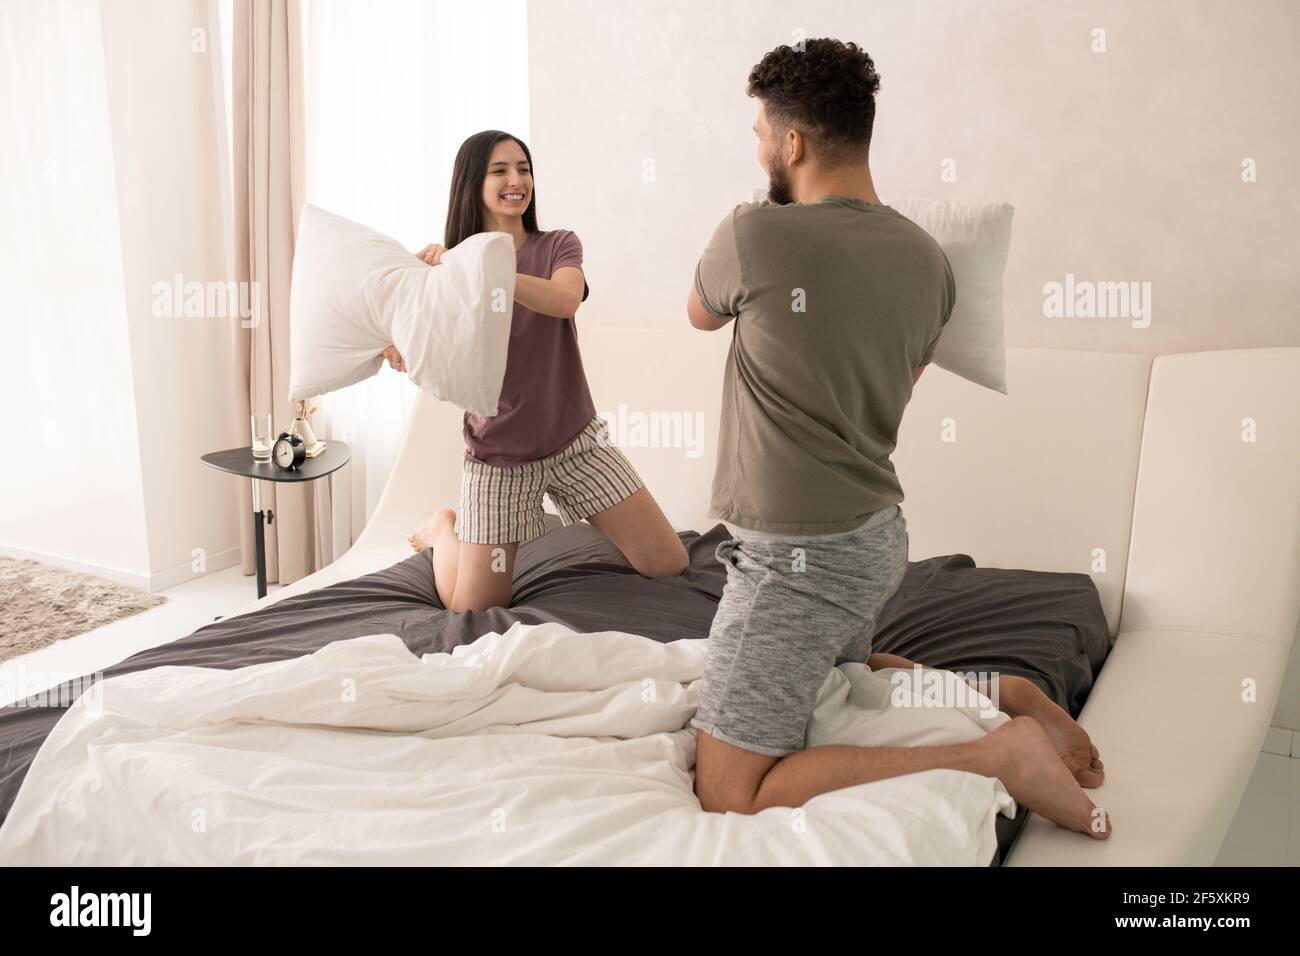 Young joyful playful couple expressing gladness while fighting with pillows on large double bed on weekend morning after sleep and breakfast Stock Photo